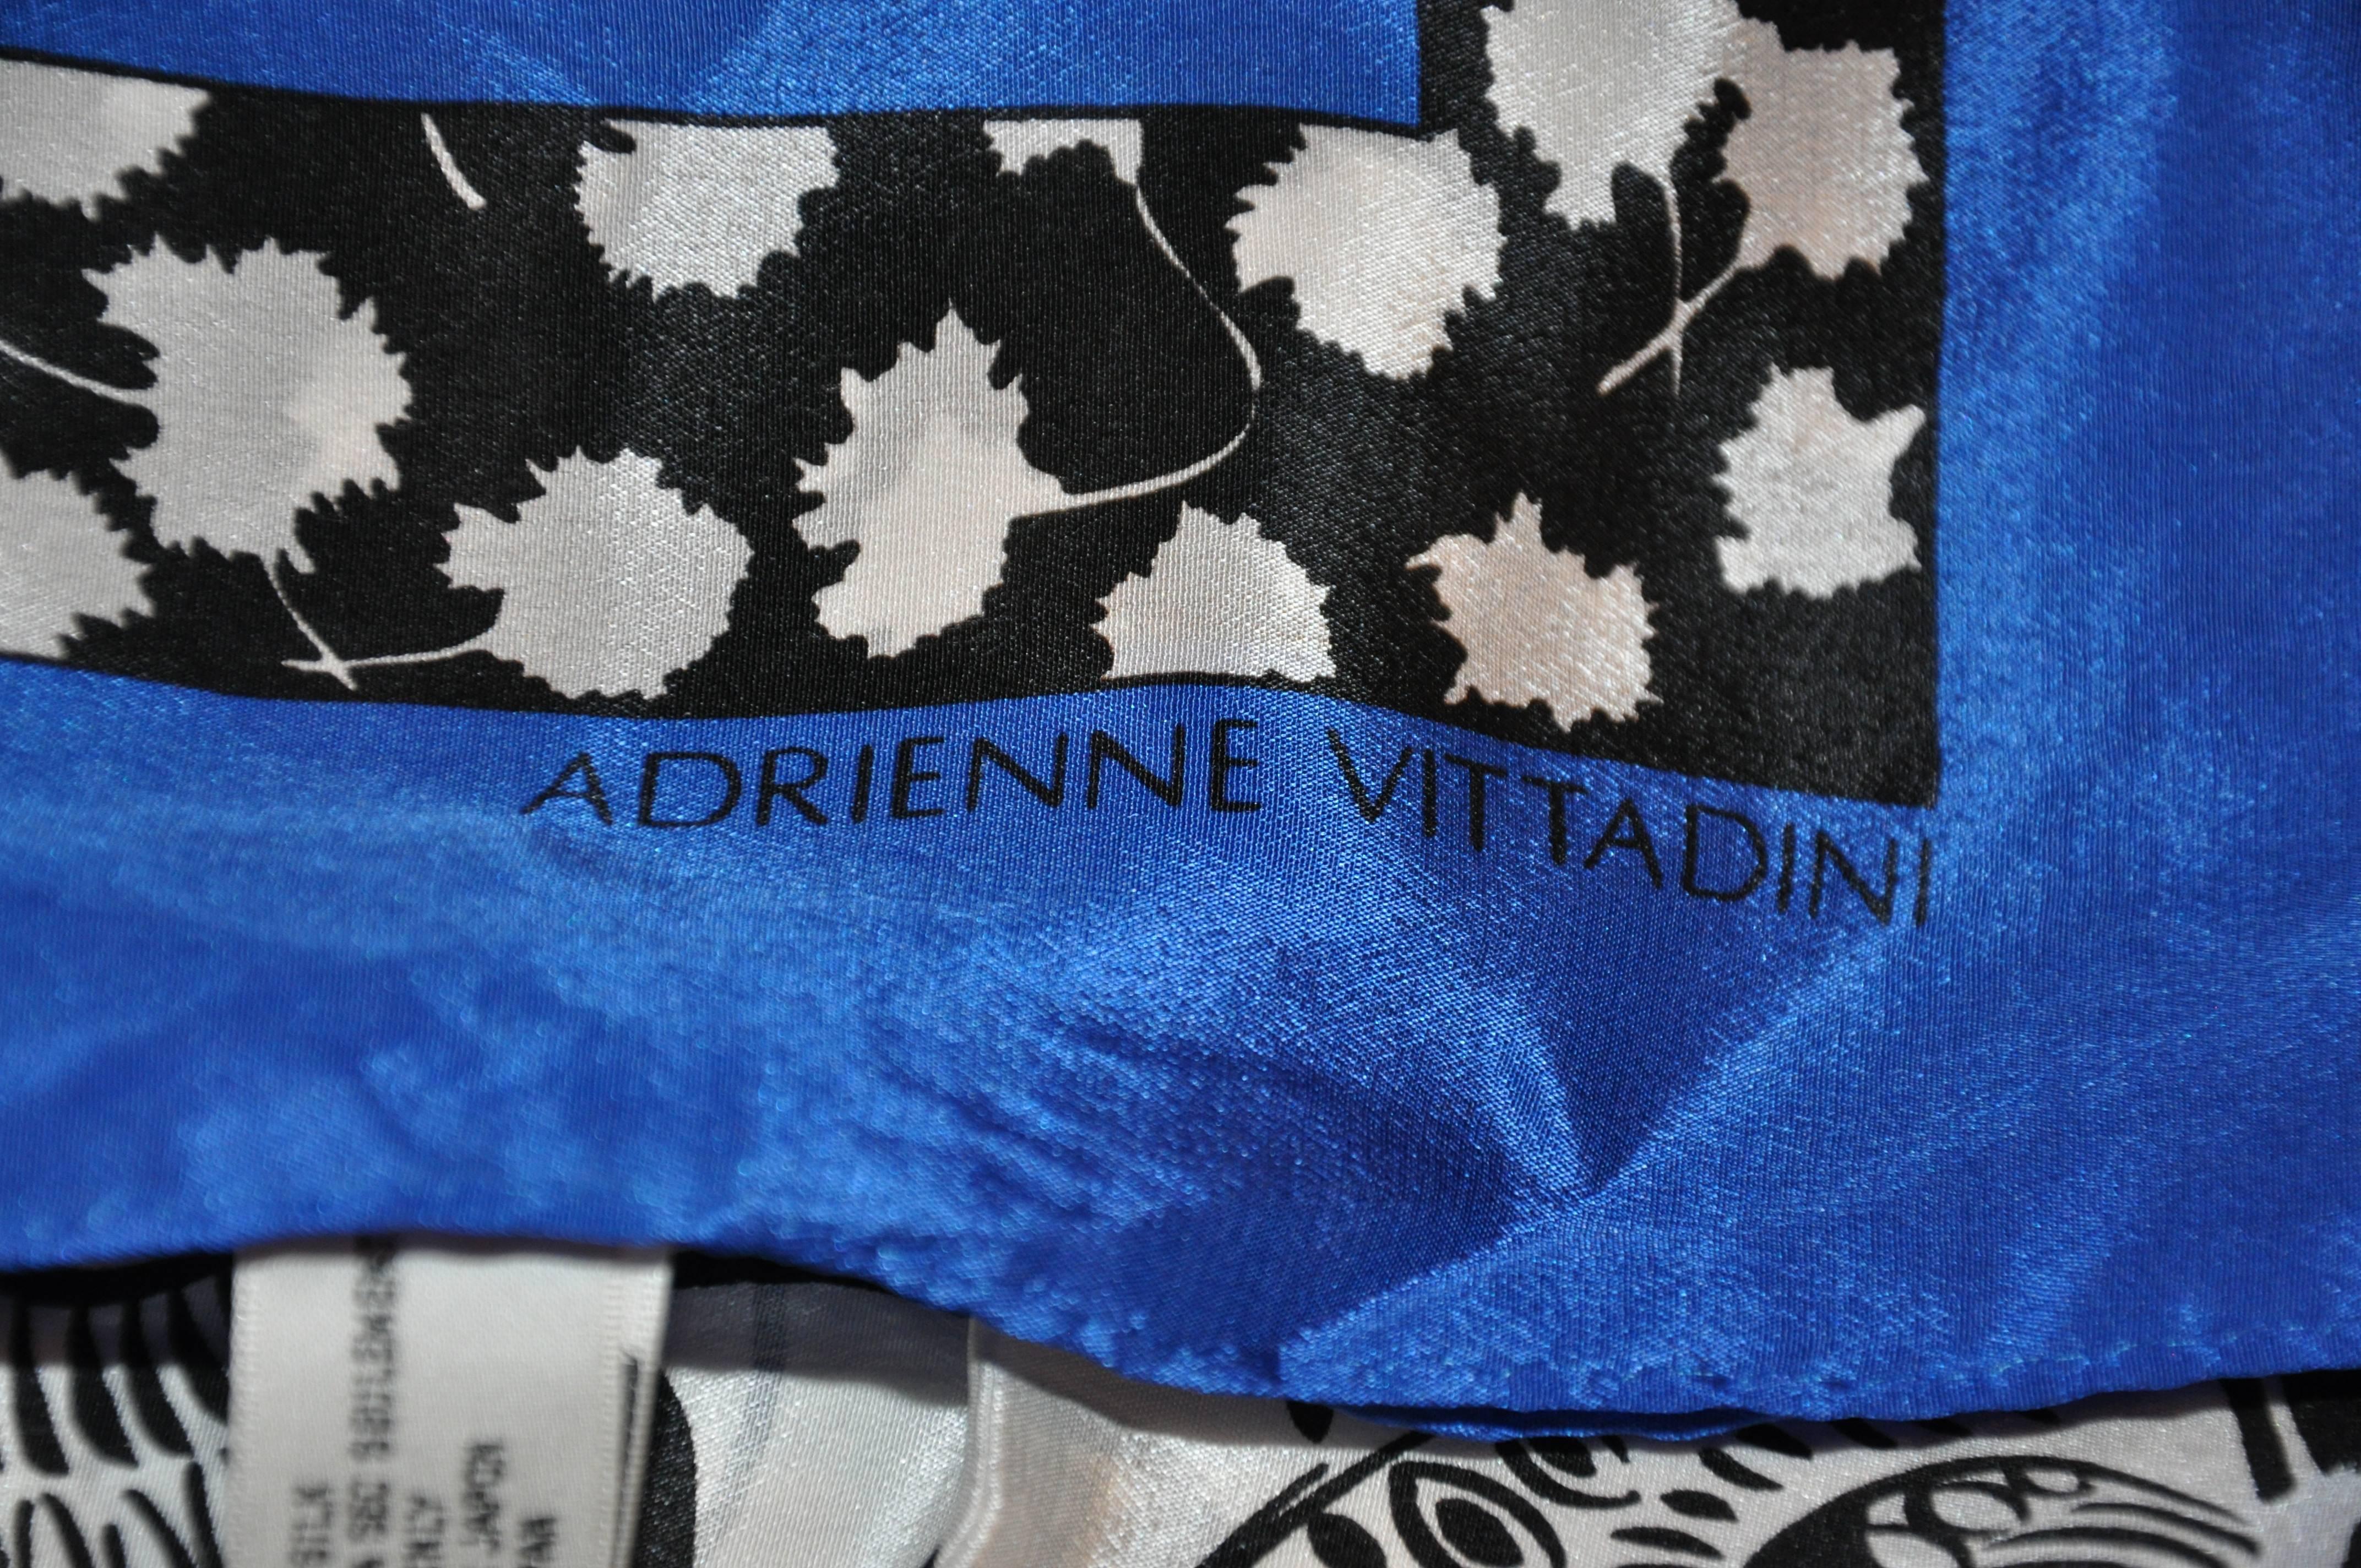        Adrienne Vittadini wonderfully bold floral silk scarf with colors of navy, white and black measures 32